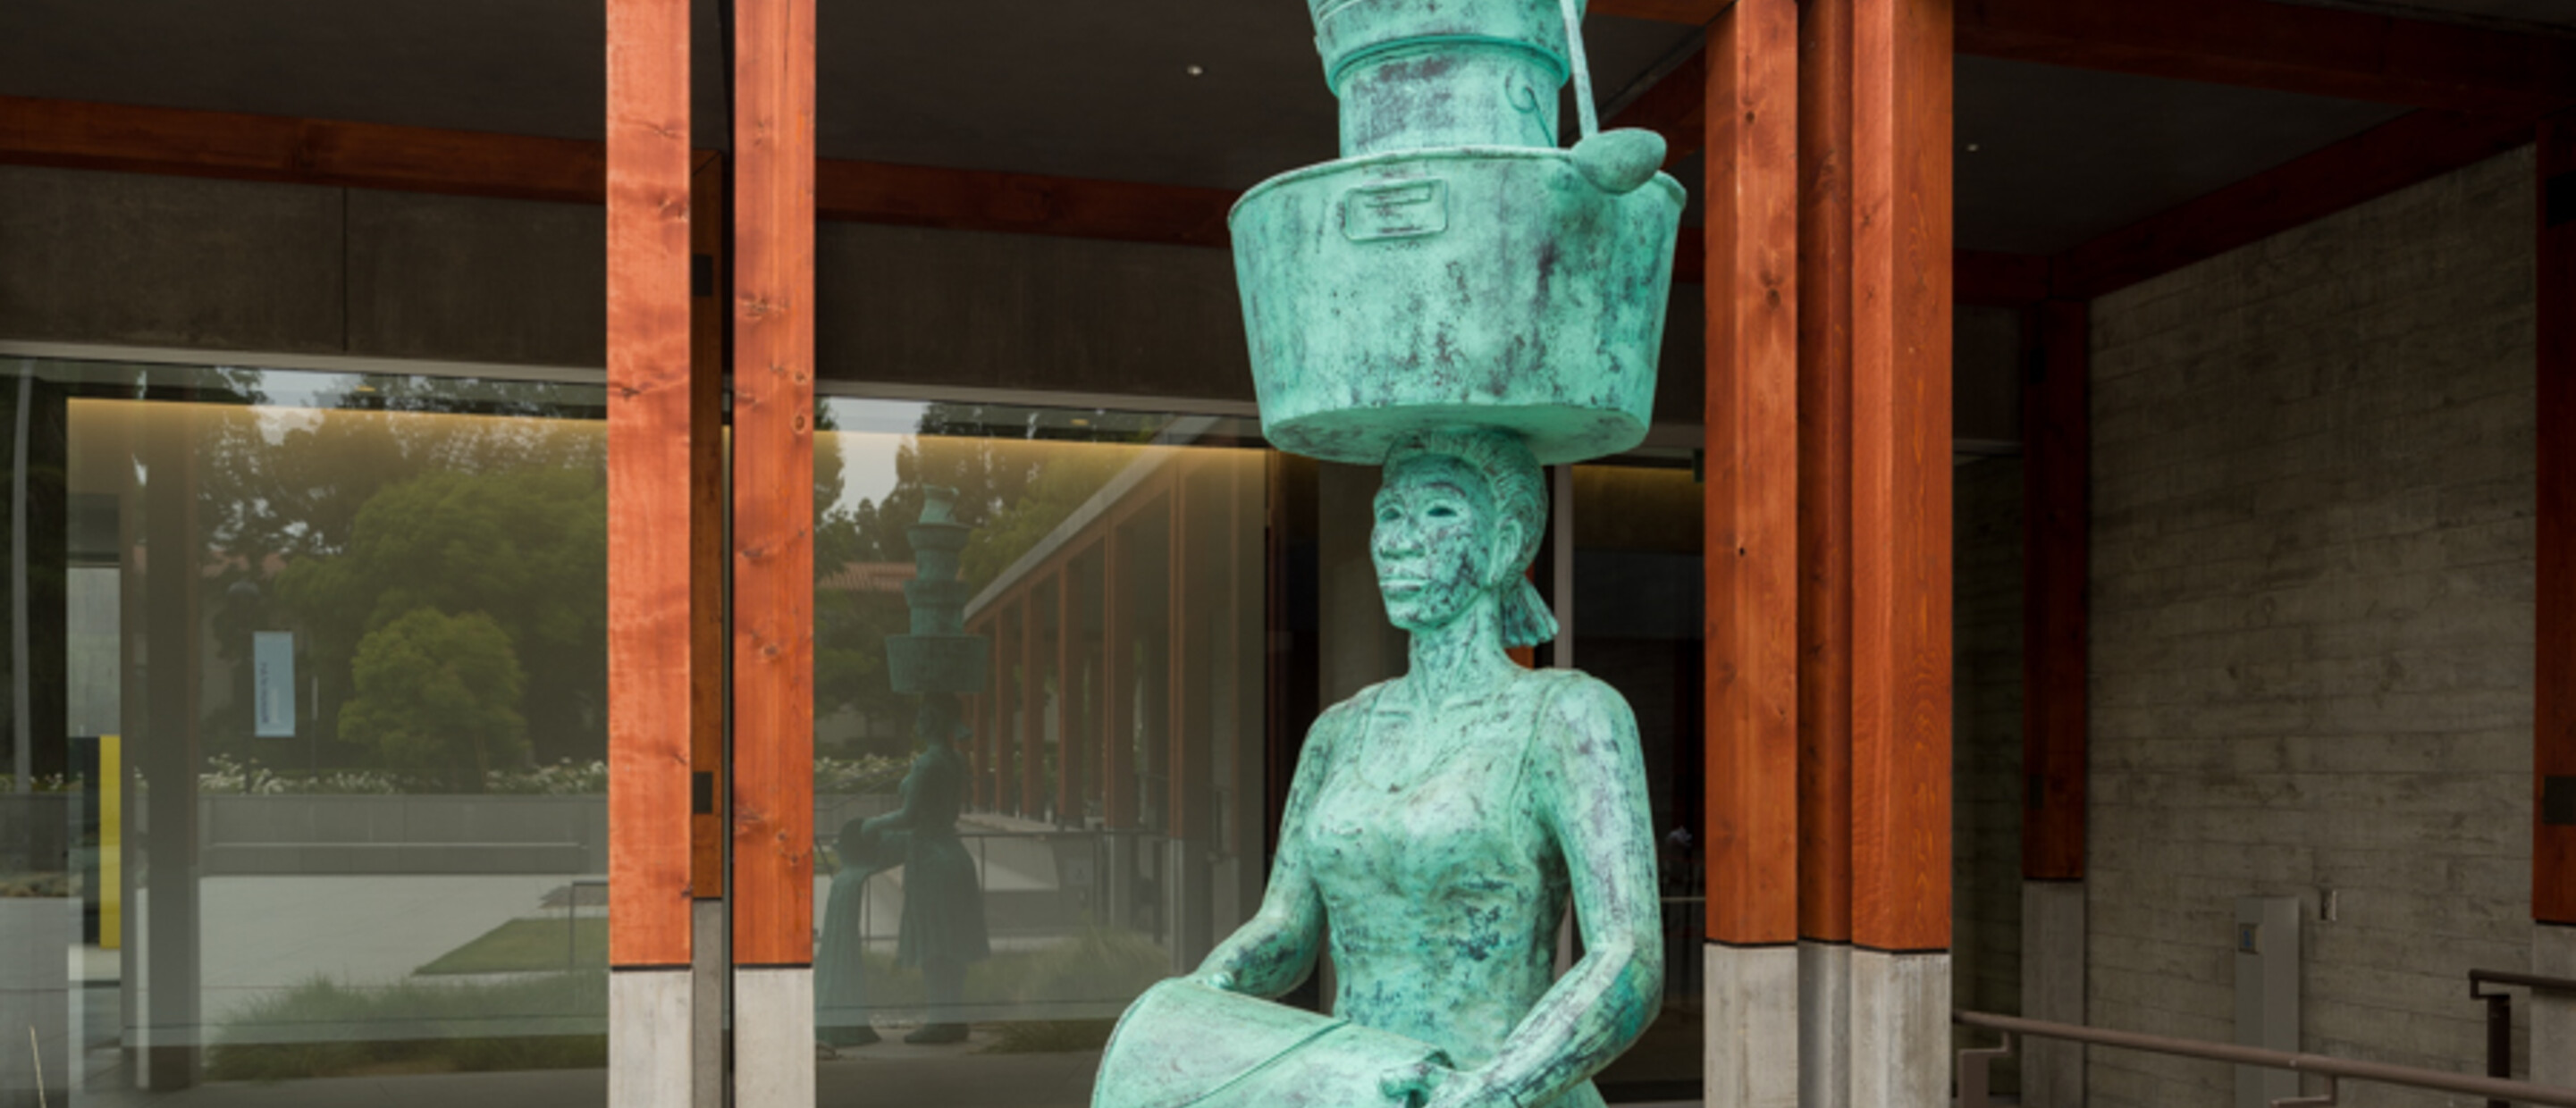 Tall bronze outdoor sculpture of female figure holding stacked pots above while pouring water from a handheld pot